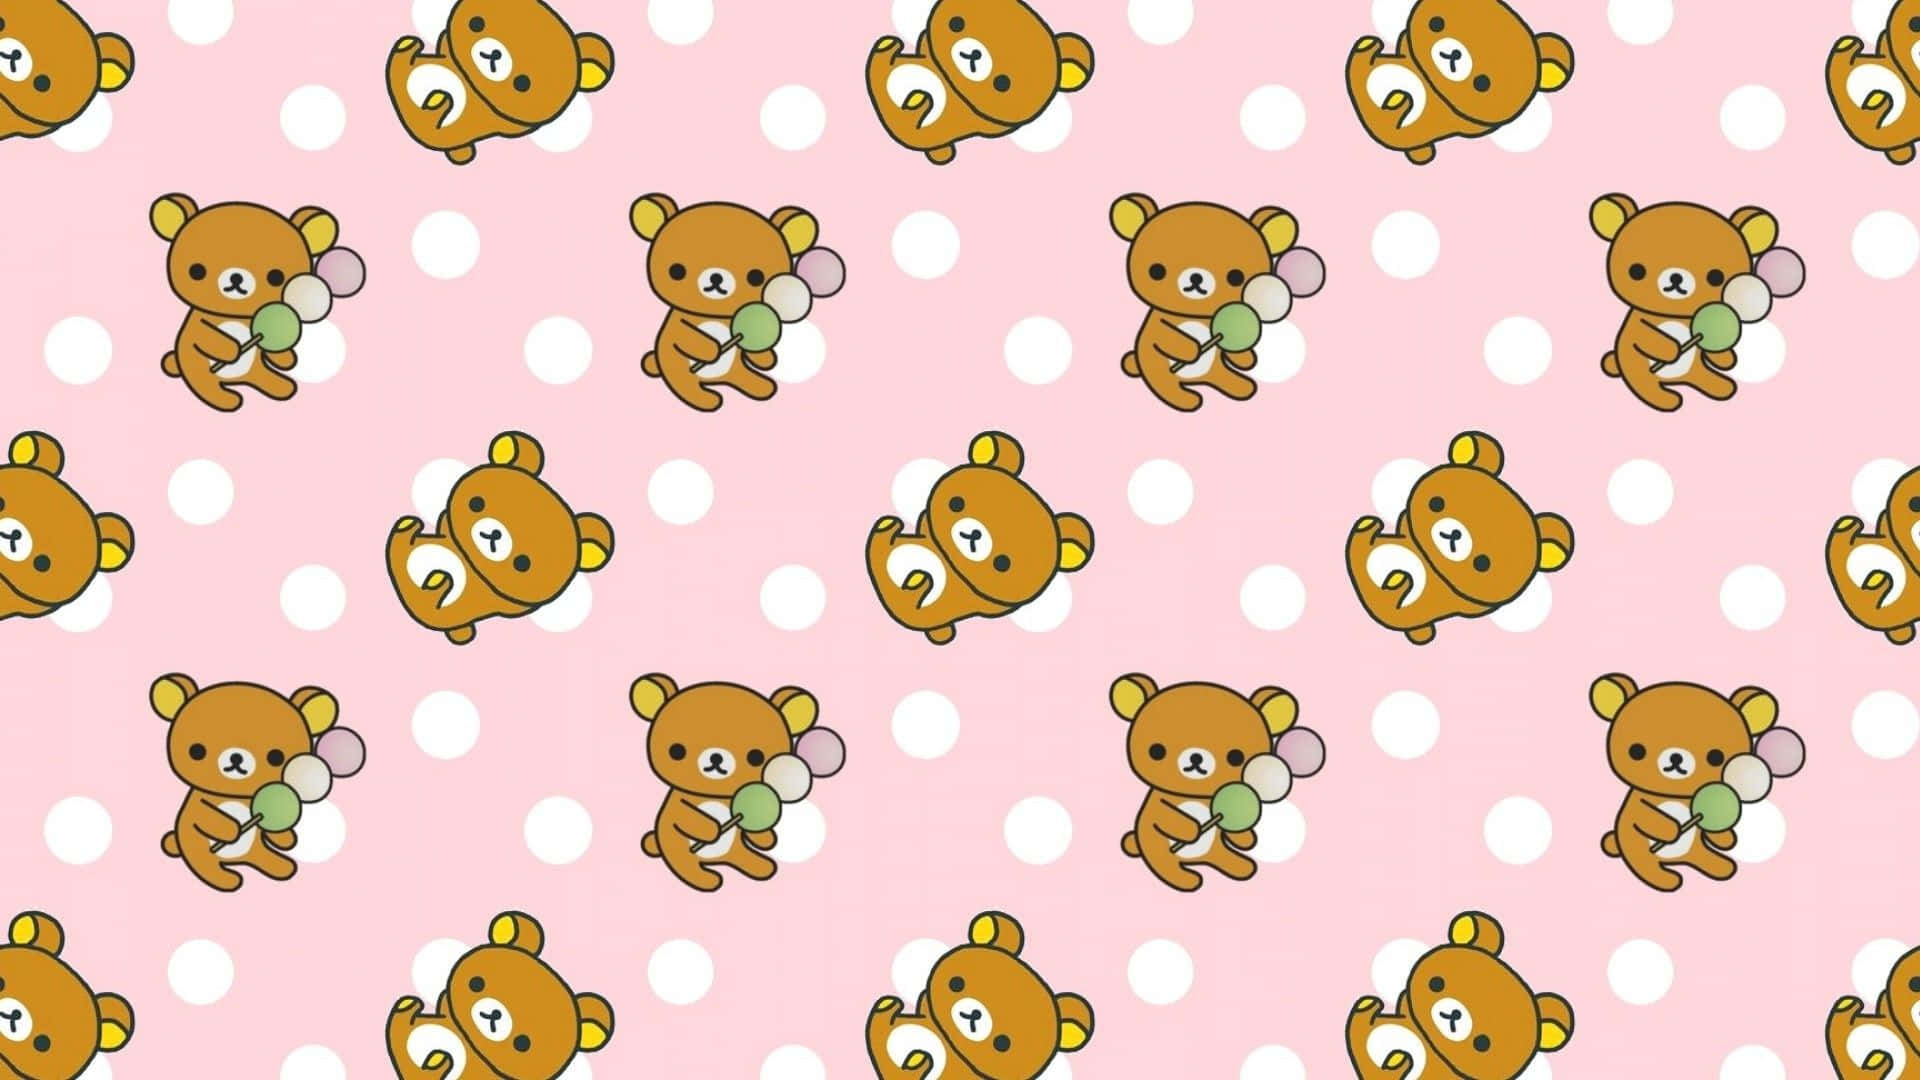 Brighten your day with this fun and colorful, Kawaii Pastel Laptop Wallpaper